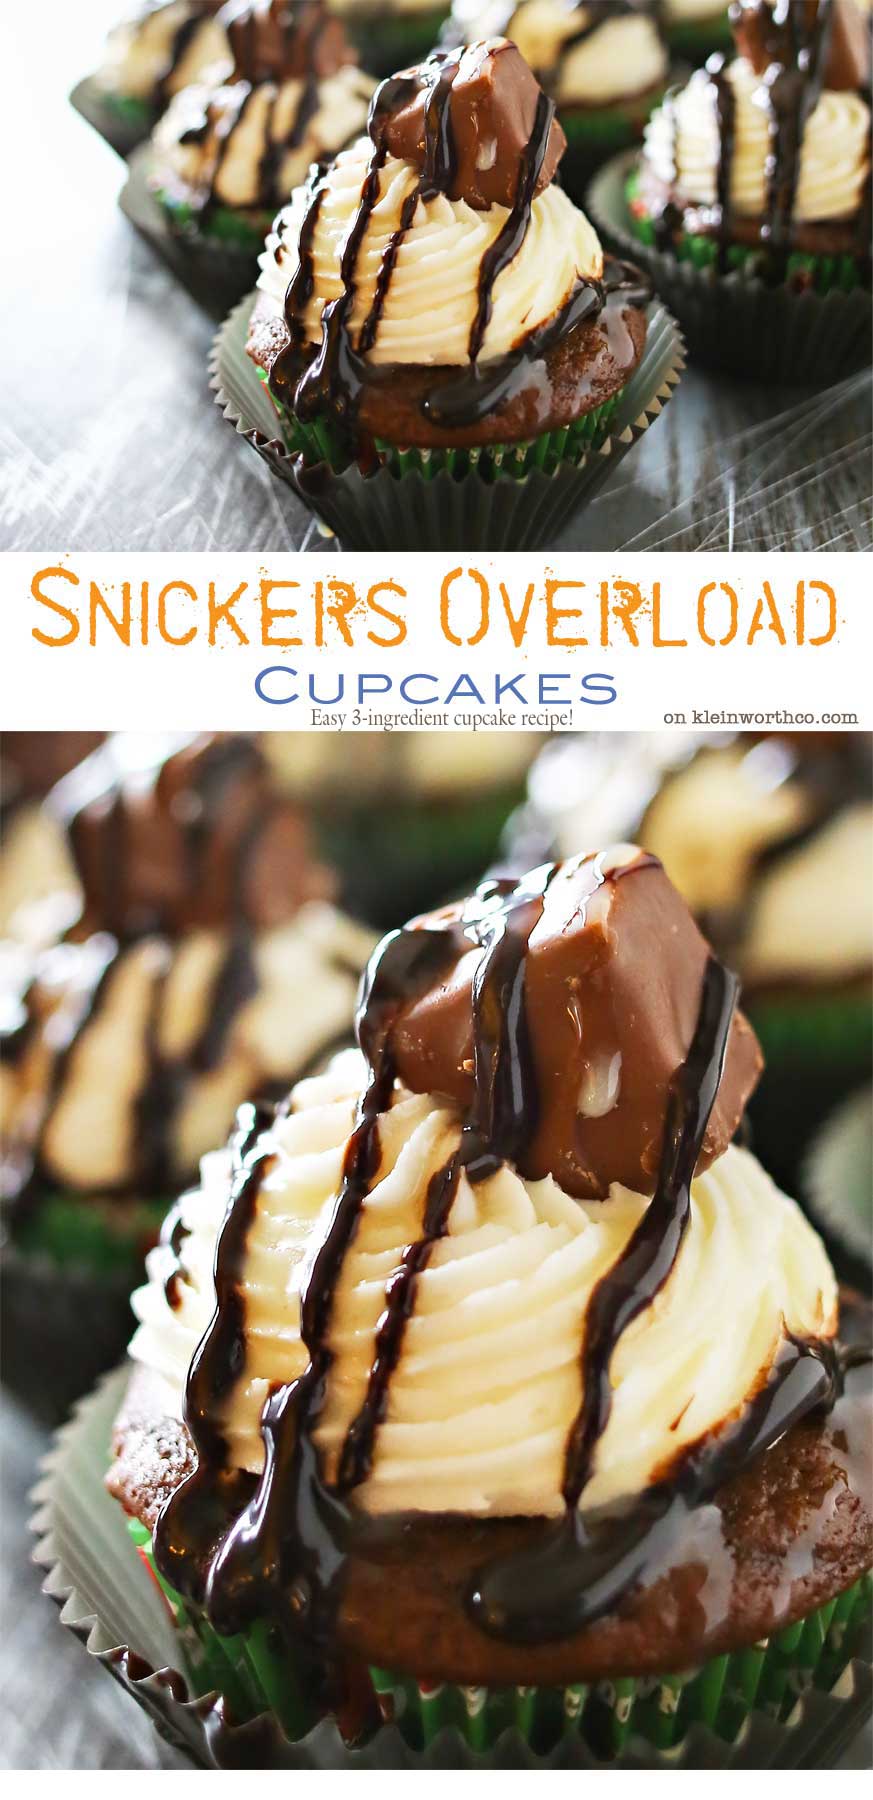 Snickers Overload Cupcakes are simple 3 ingredient chocolate cupcakes stuffed & topped with Snickers bars. Add the easy to make frosting & you are good to go. So good! OMG!!! Snickers Cupcakes are my favorite.